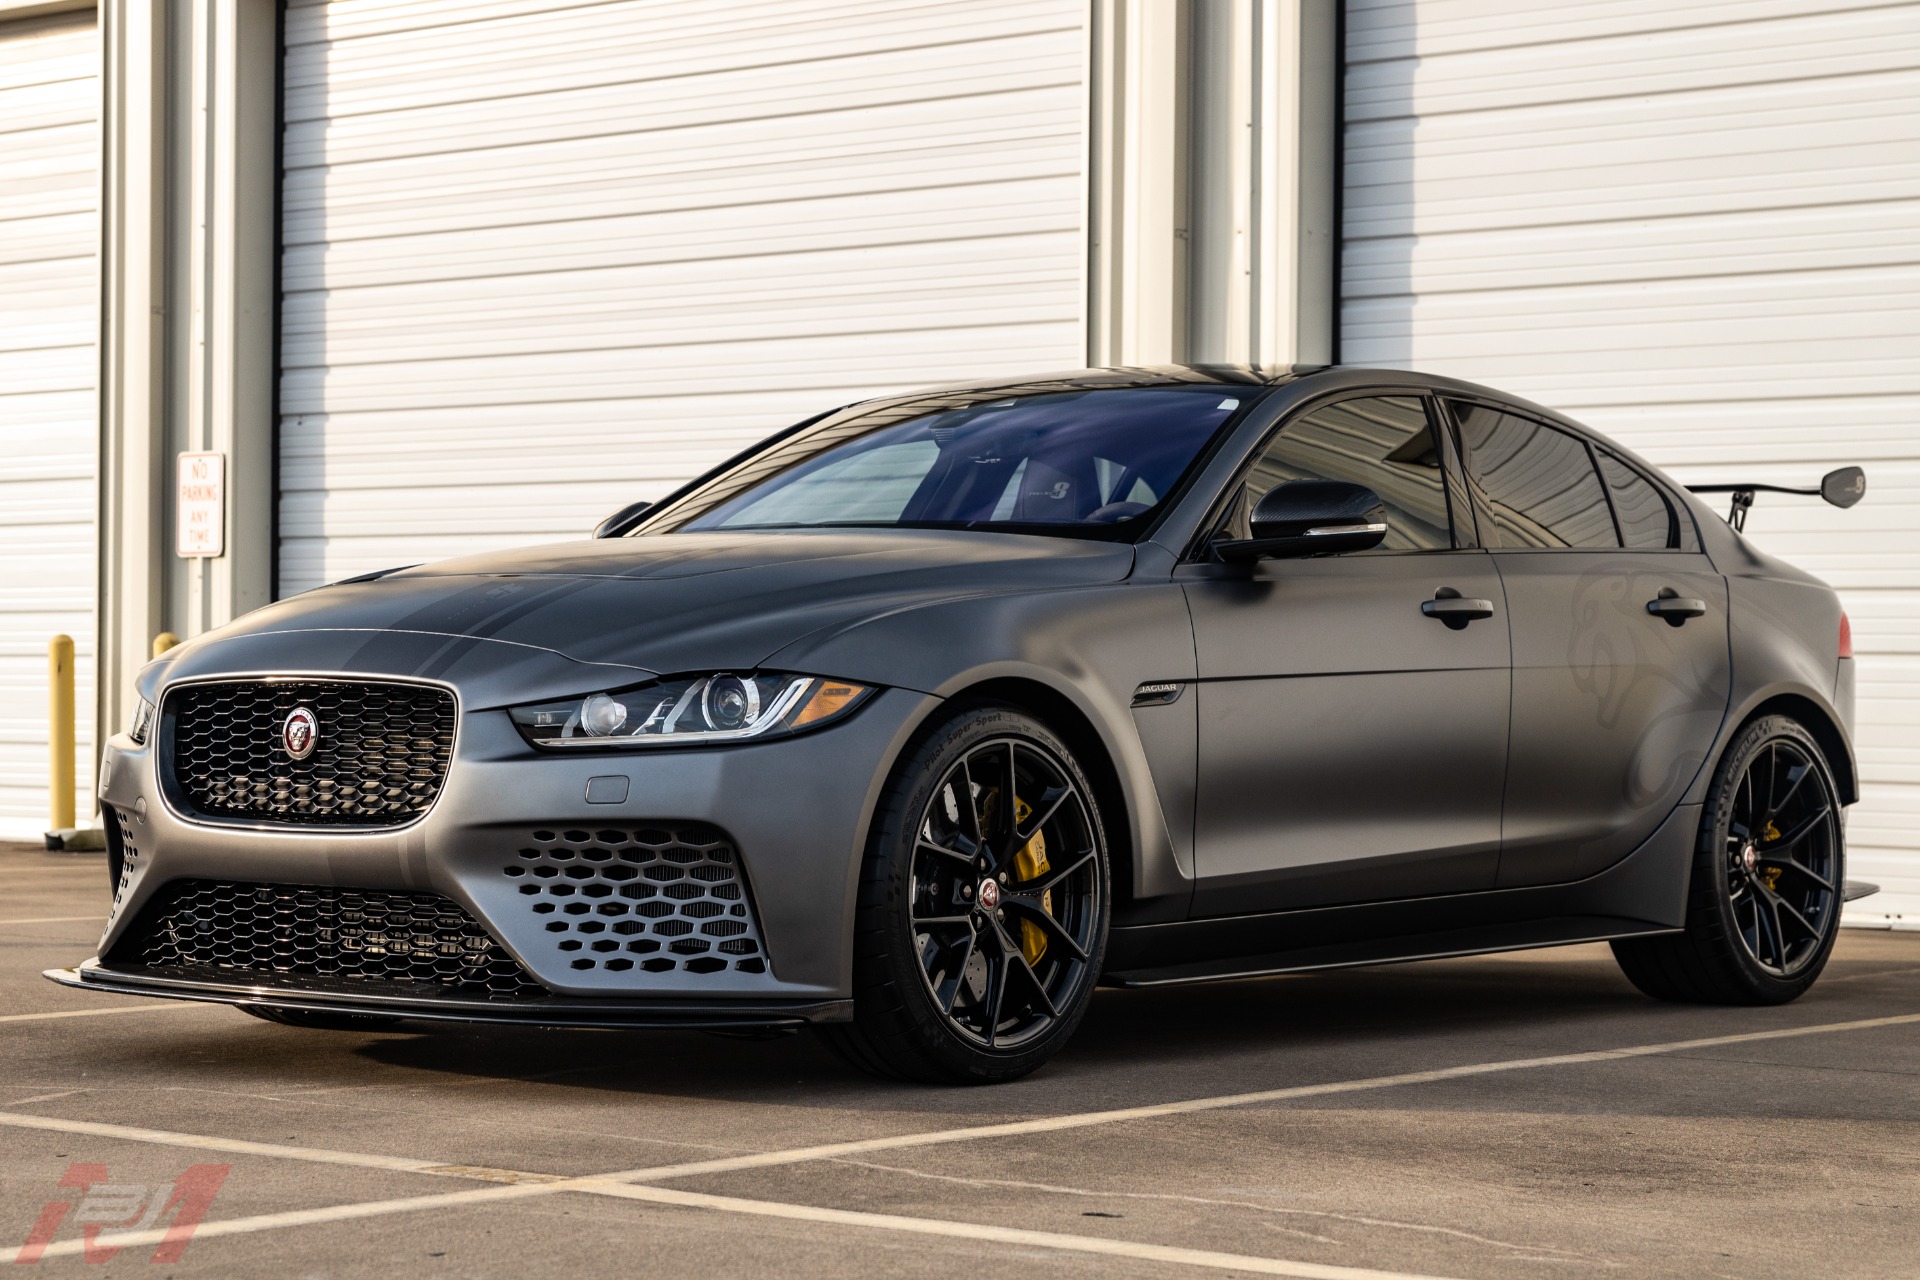 Used 2019 Jaguar XE SV Project 8 For Sale (Special Pricing)